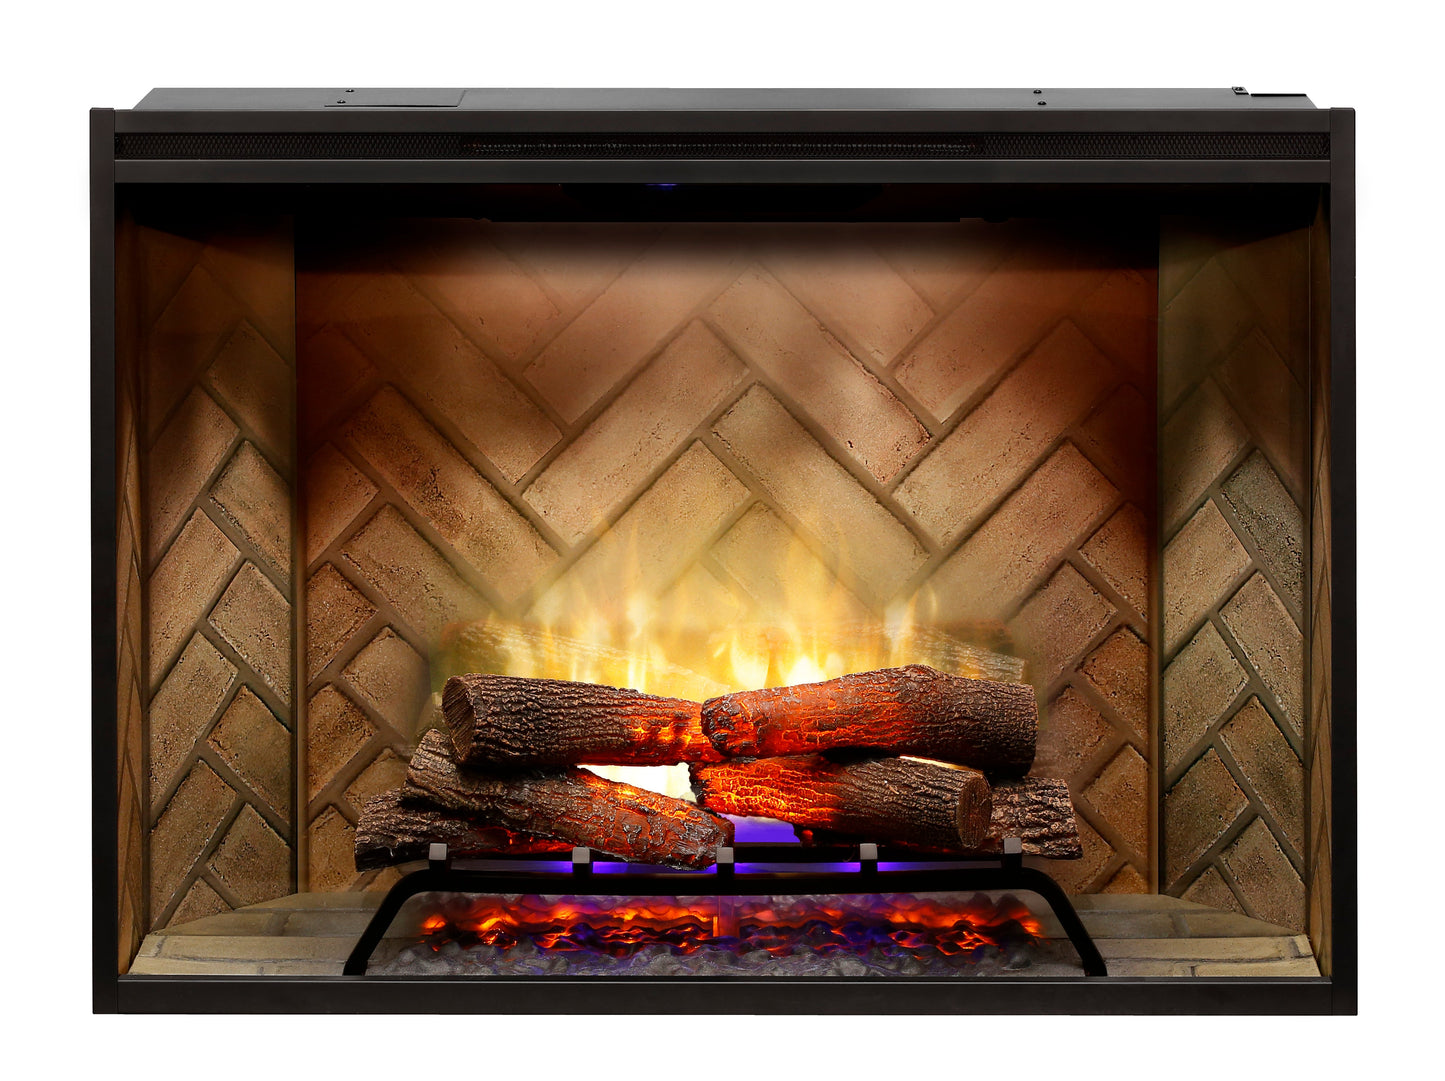 Dimplex Revillusion 42" Built In Electric Firebox (RBF42) - Electric Fireplace Shop